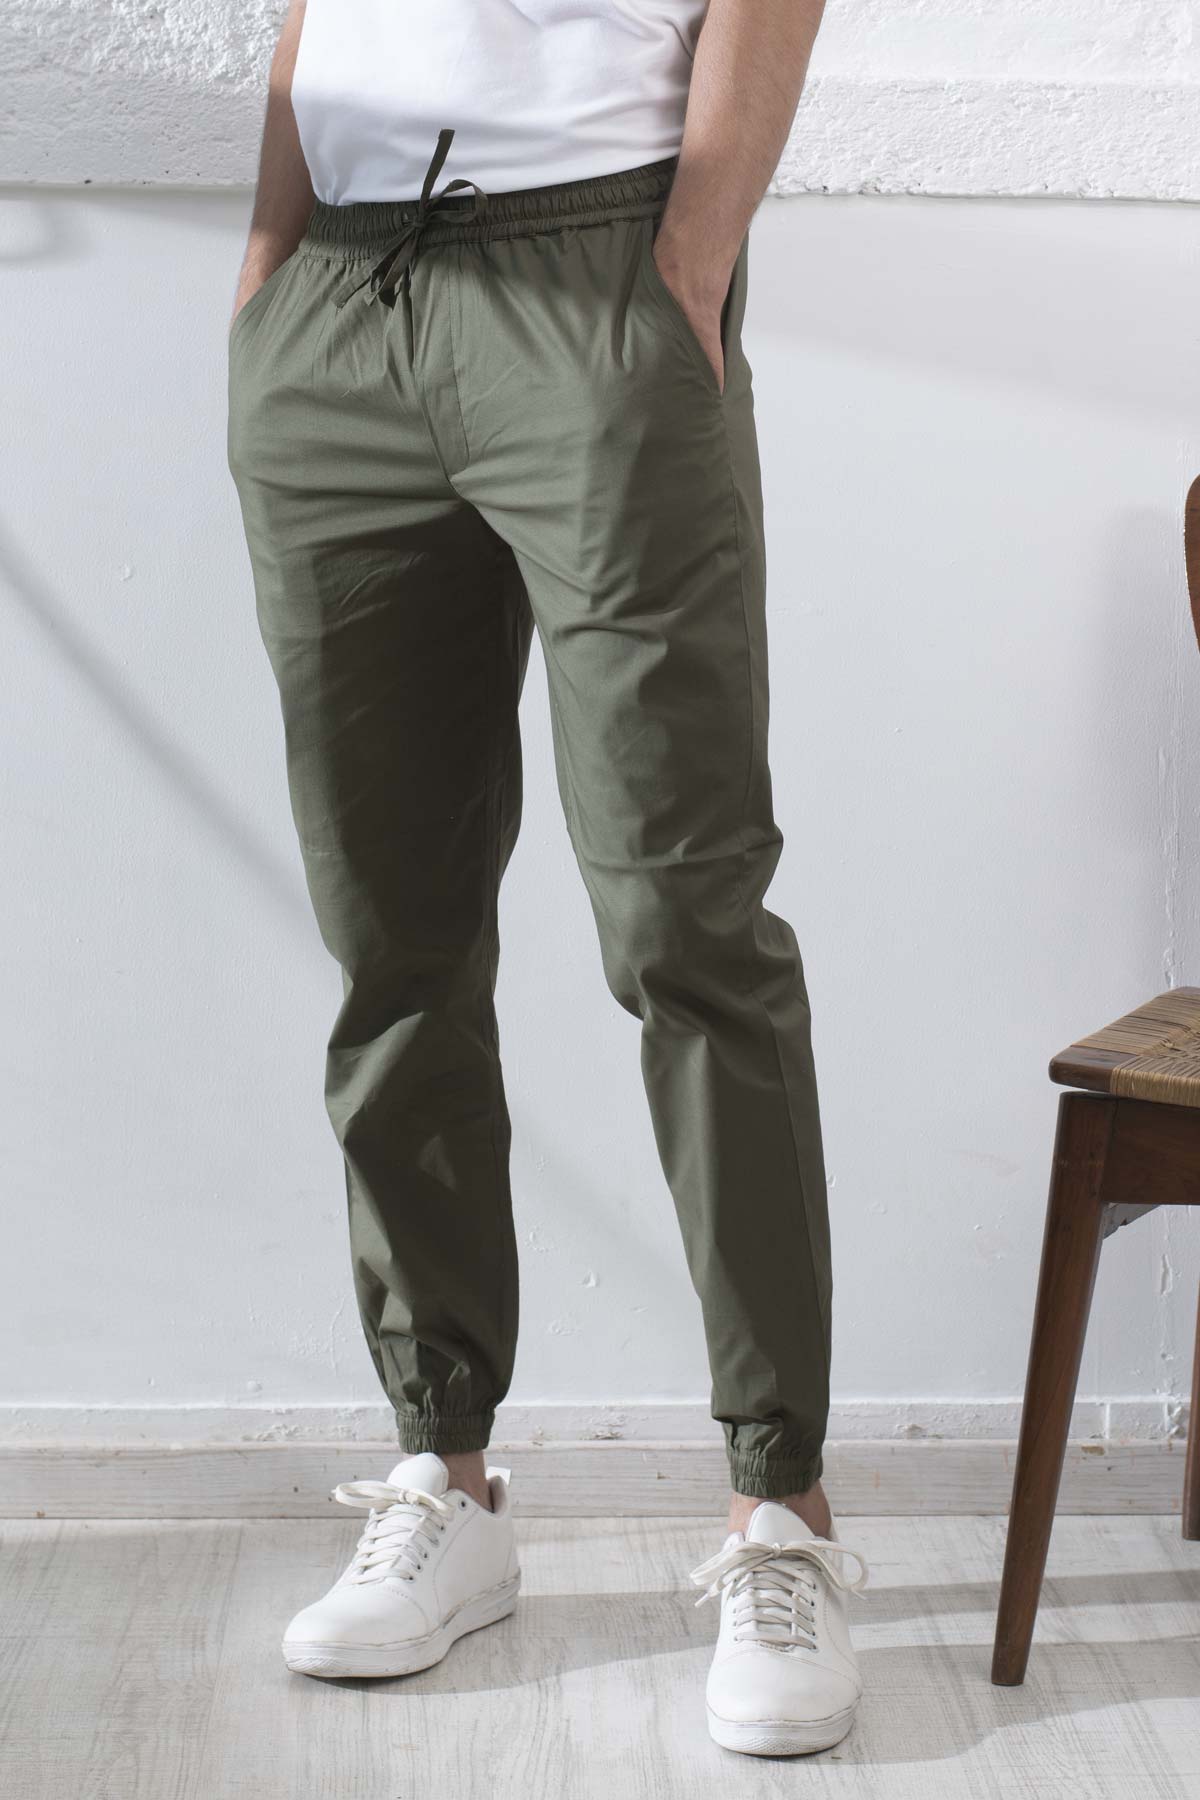 Stumped on How To Style This Wardrobe Piece? Try These 8 Stylish Fall  Outfits With Olive Green Pants - MY CHIC OBSESSION